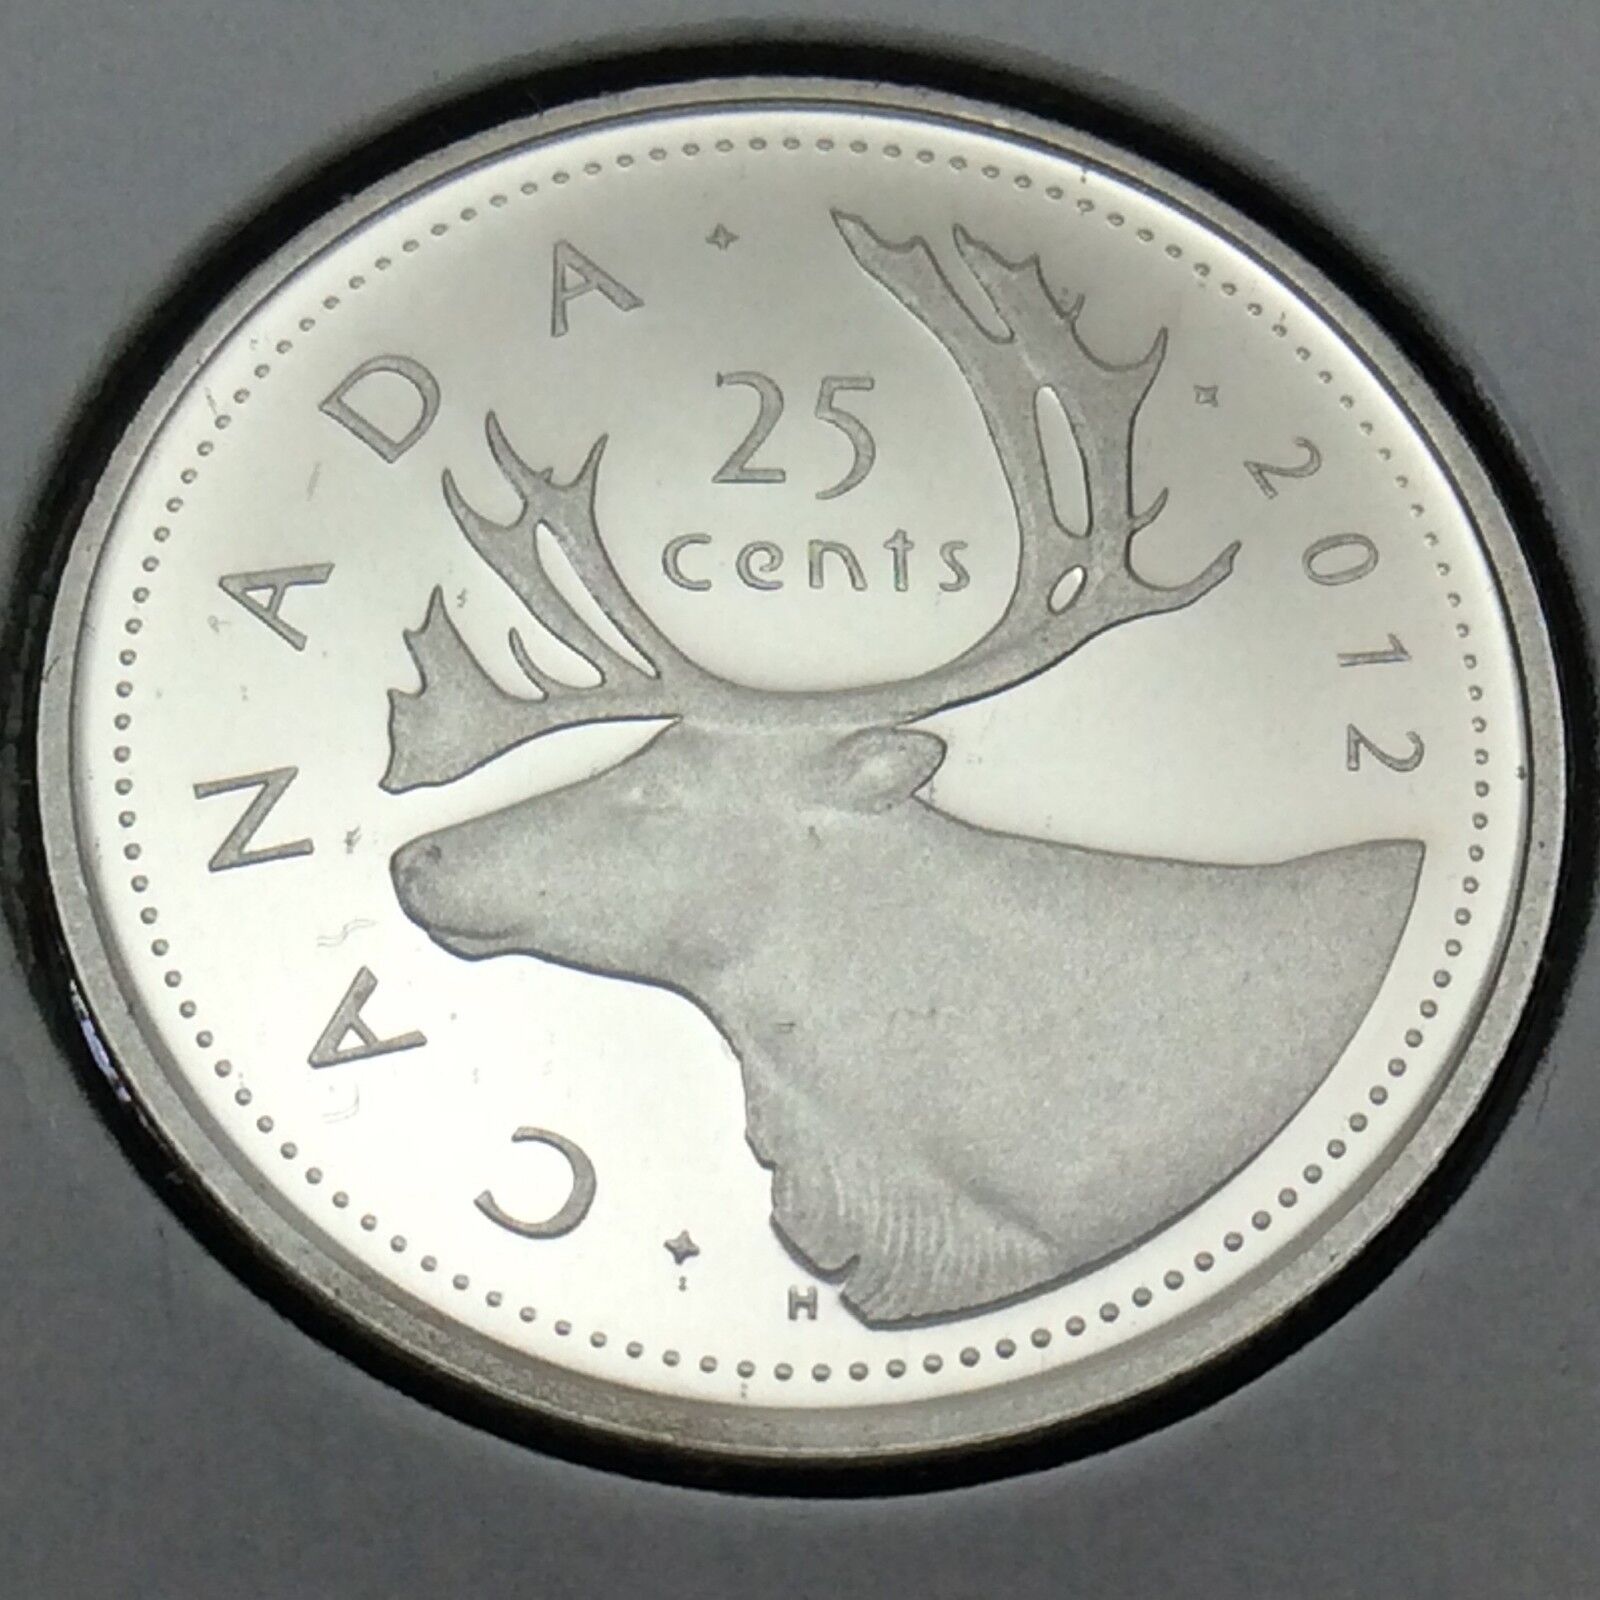 2012 Canada Proof 25 Cents Quarter Canadian Uncirculated Coin E207